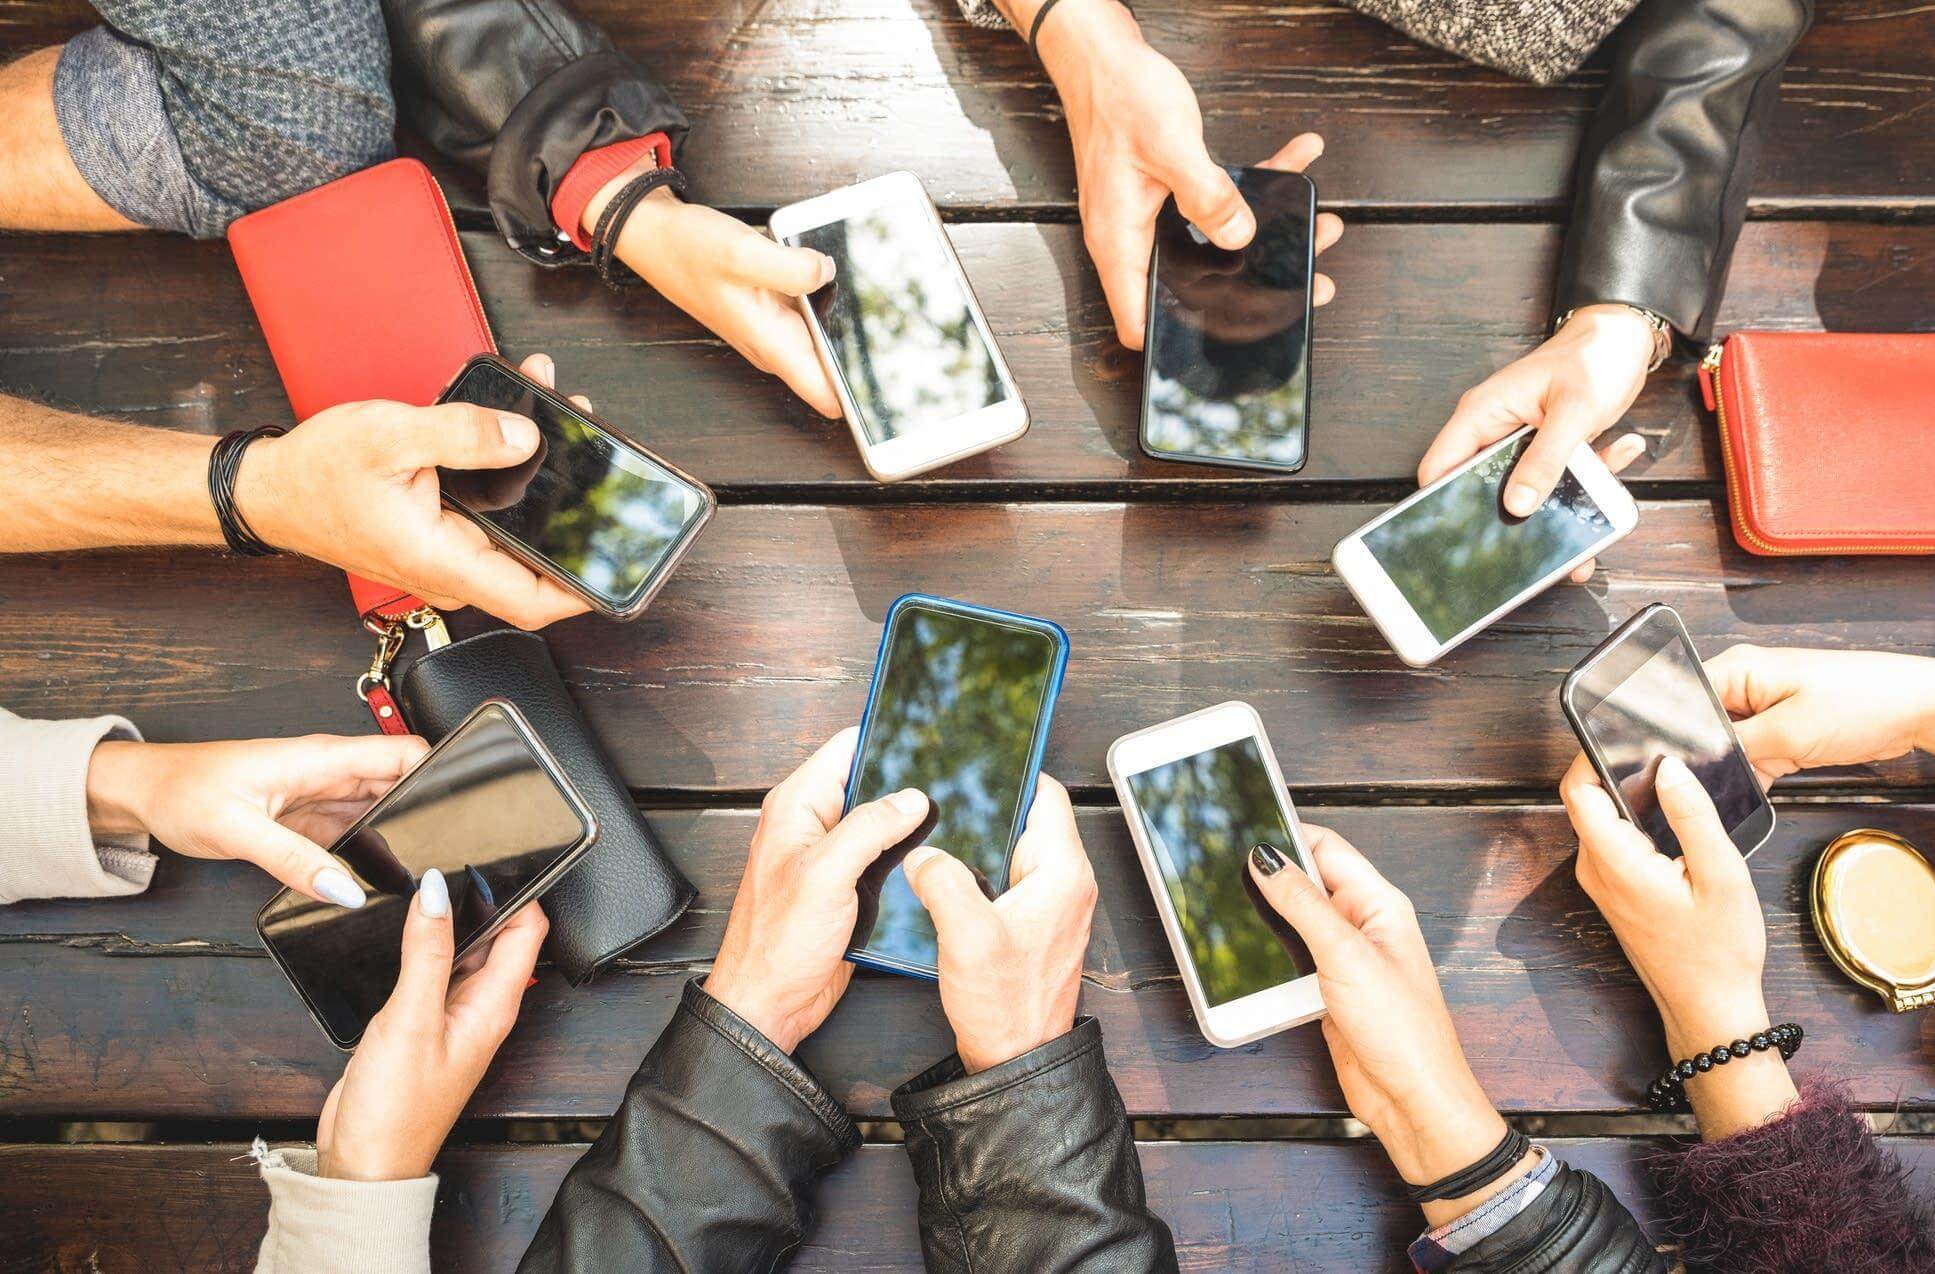 Group of Friends Sitting At Table with Mobile Phones Out